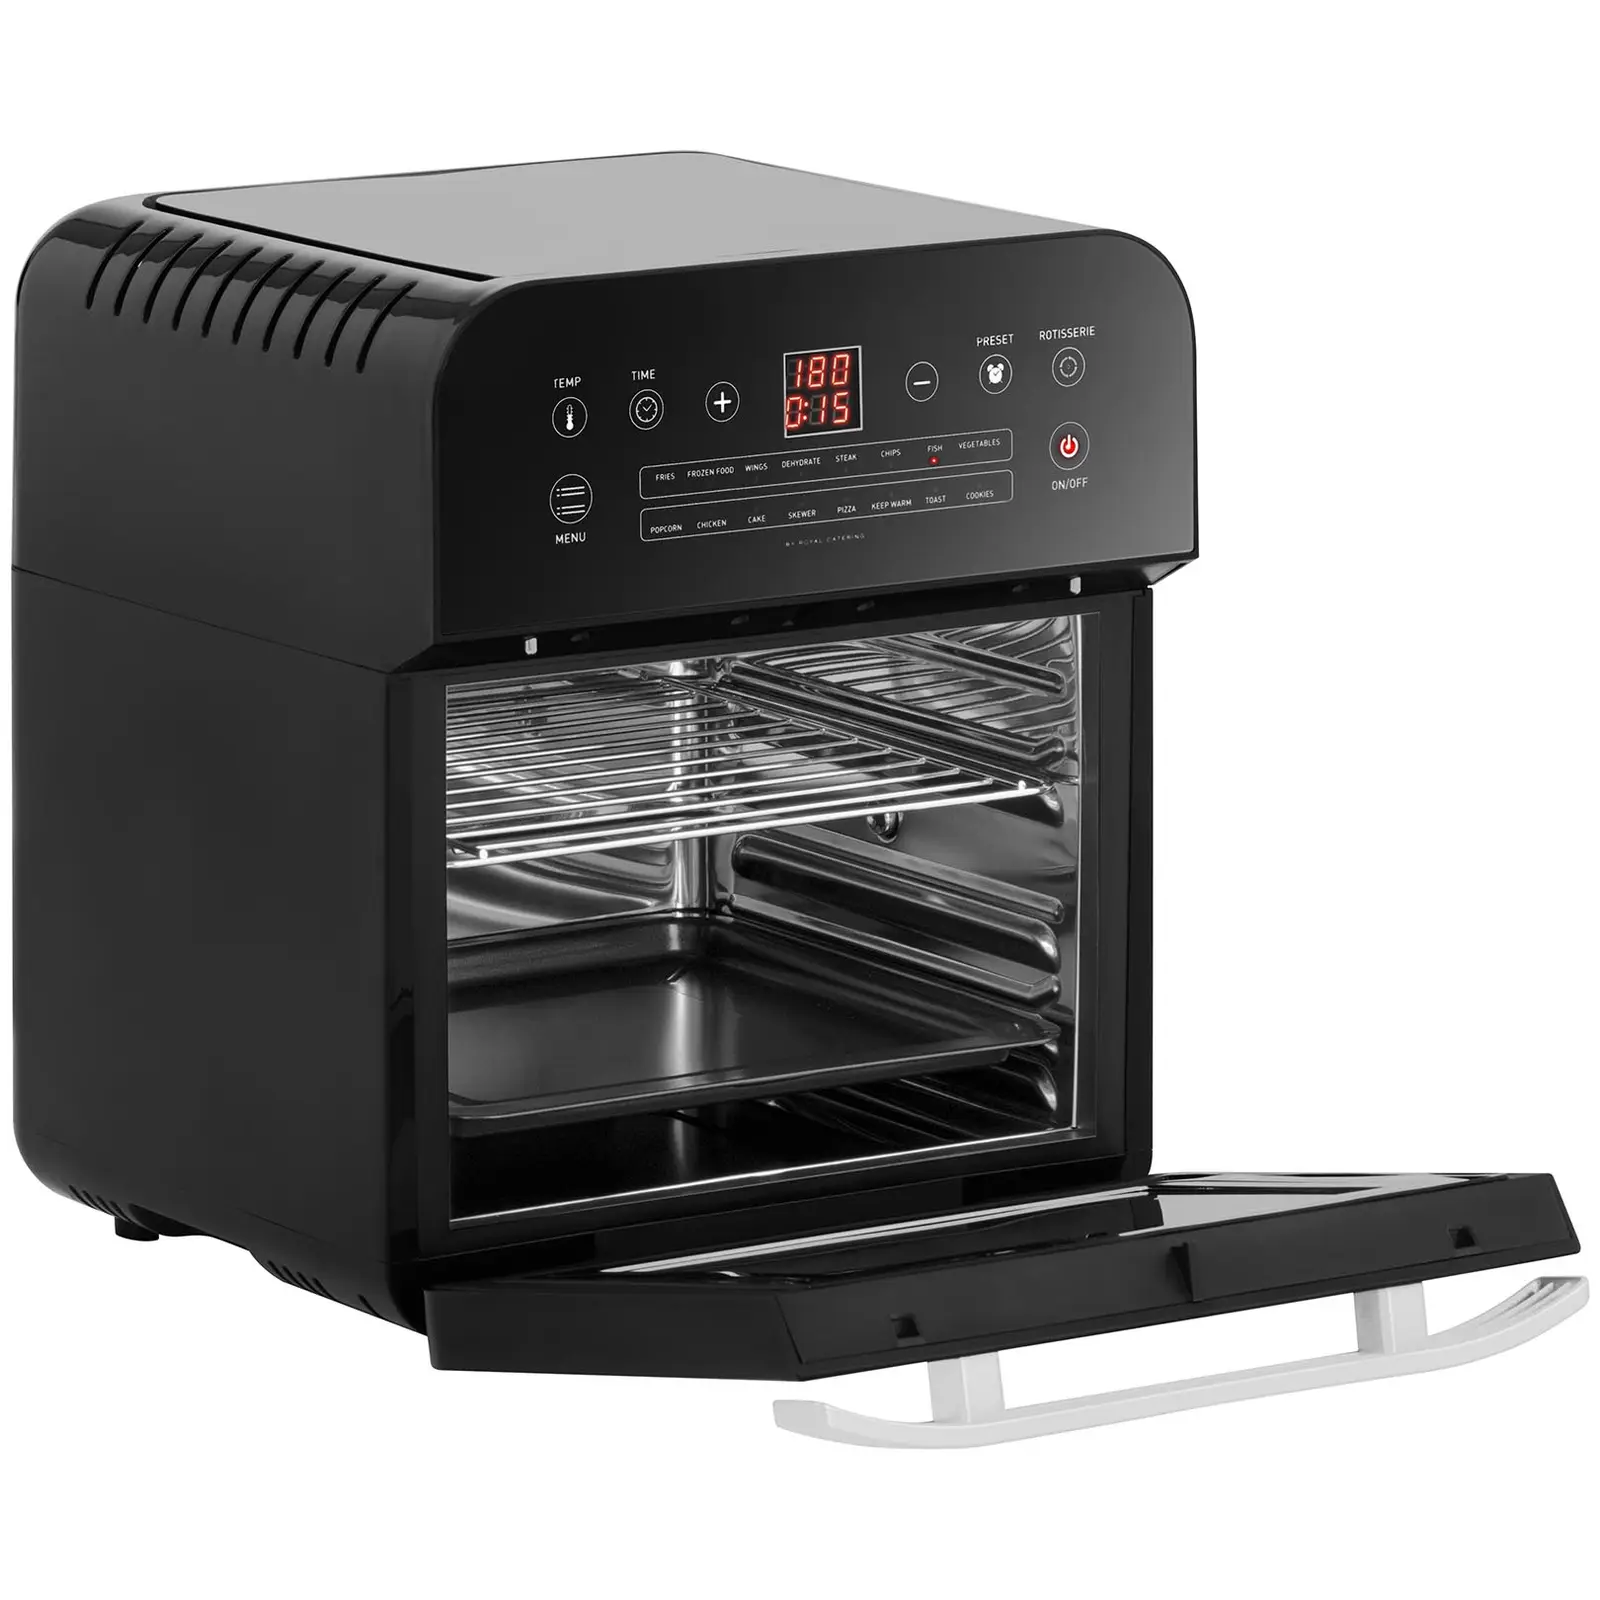 Factory second Countertop Convection Oven - 1,600 W - 13 programmes - incl. oven rack, baking sheet, rotisserie and drip tray